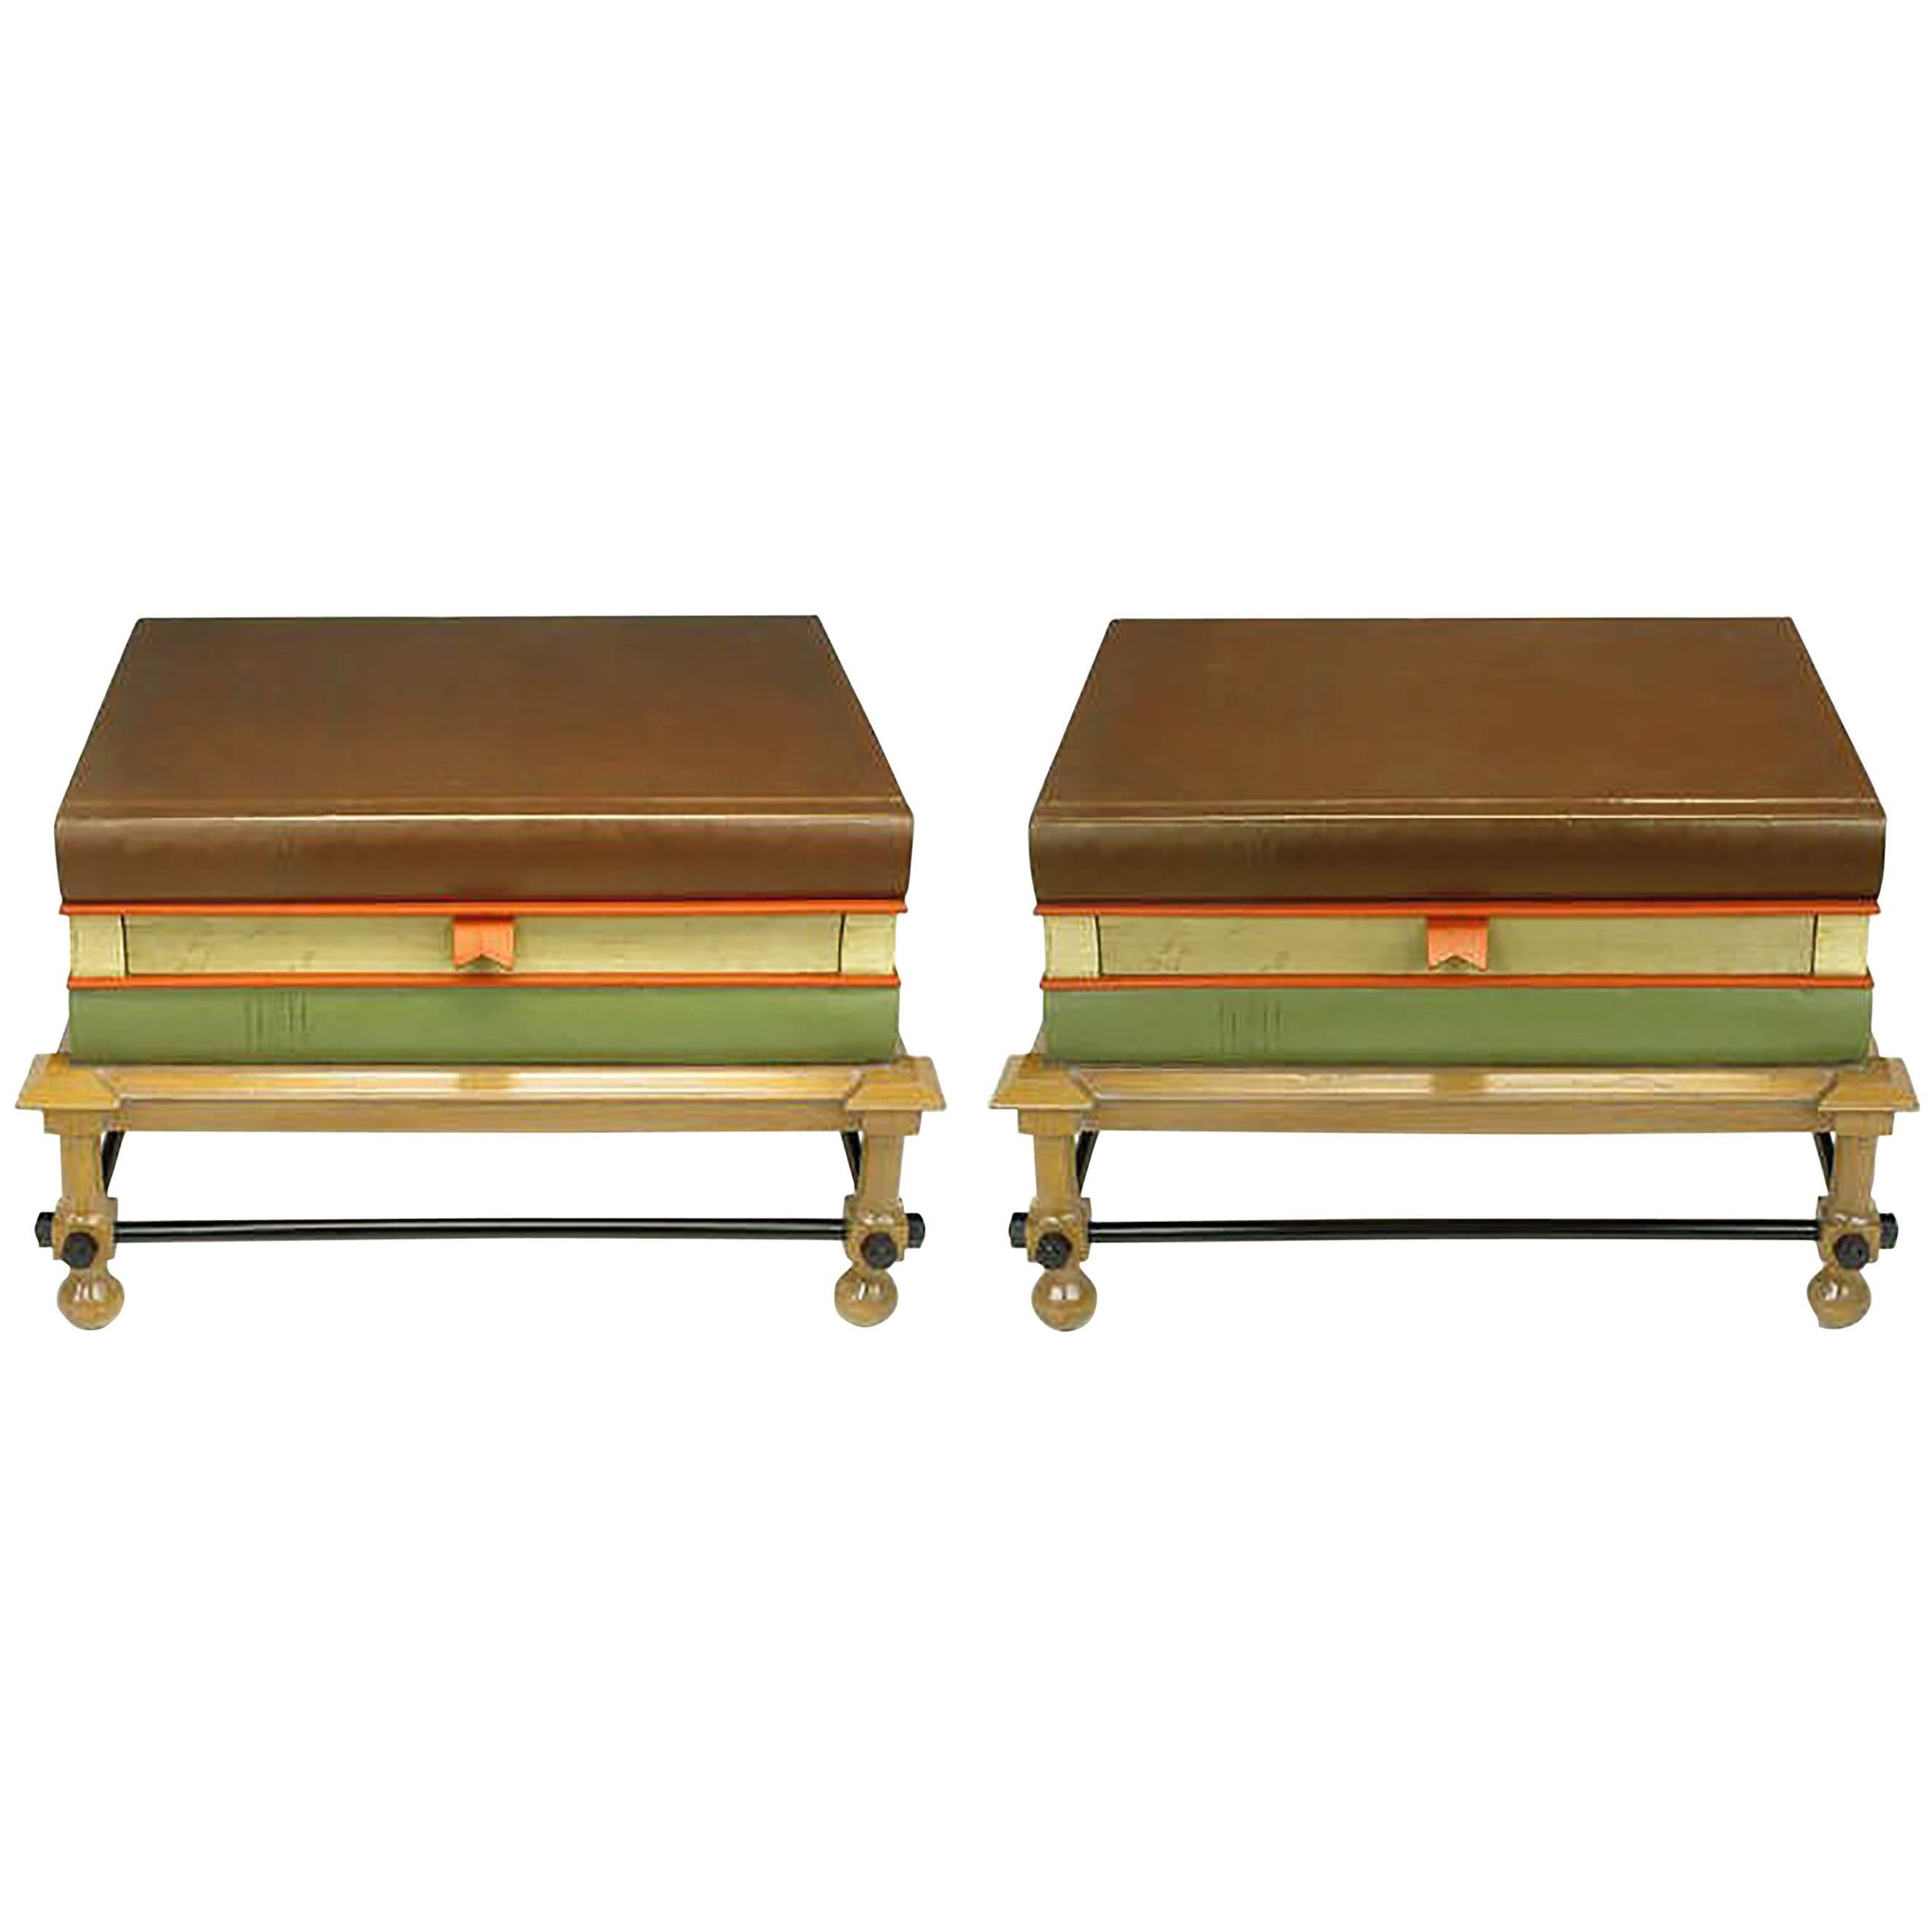 Pair of Rare John Dickinson Stacked Books End Tables